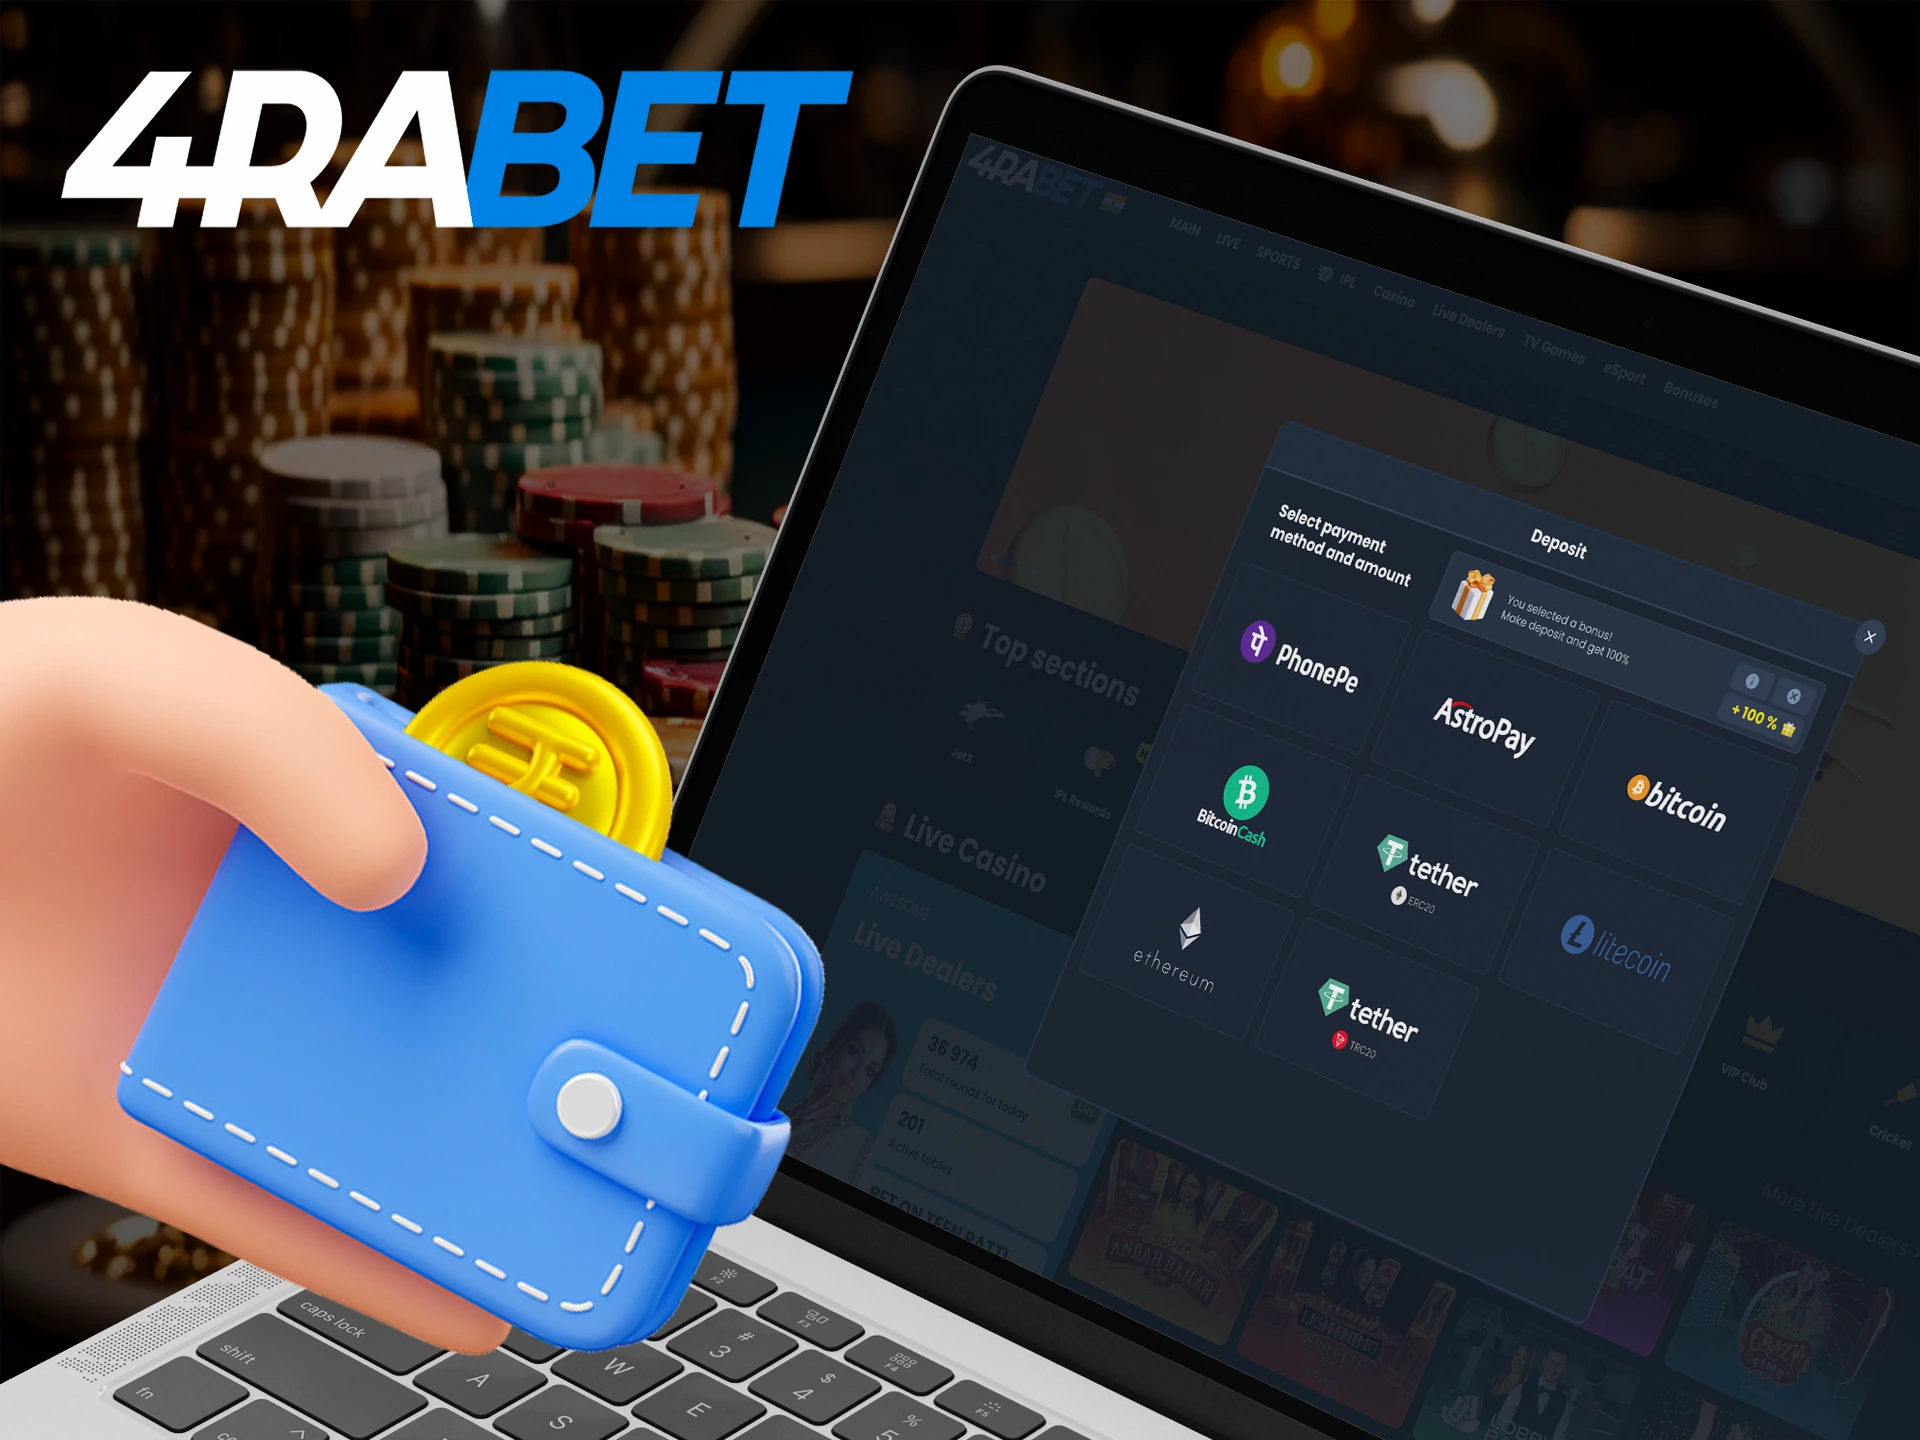 Find out how to fund your account at 4Rabet India so you can start betting.